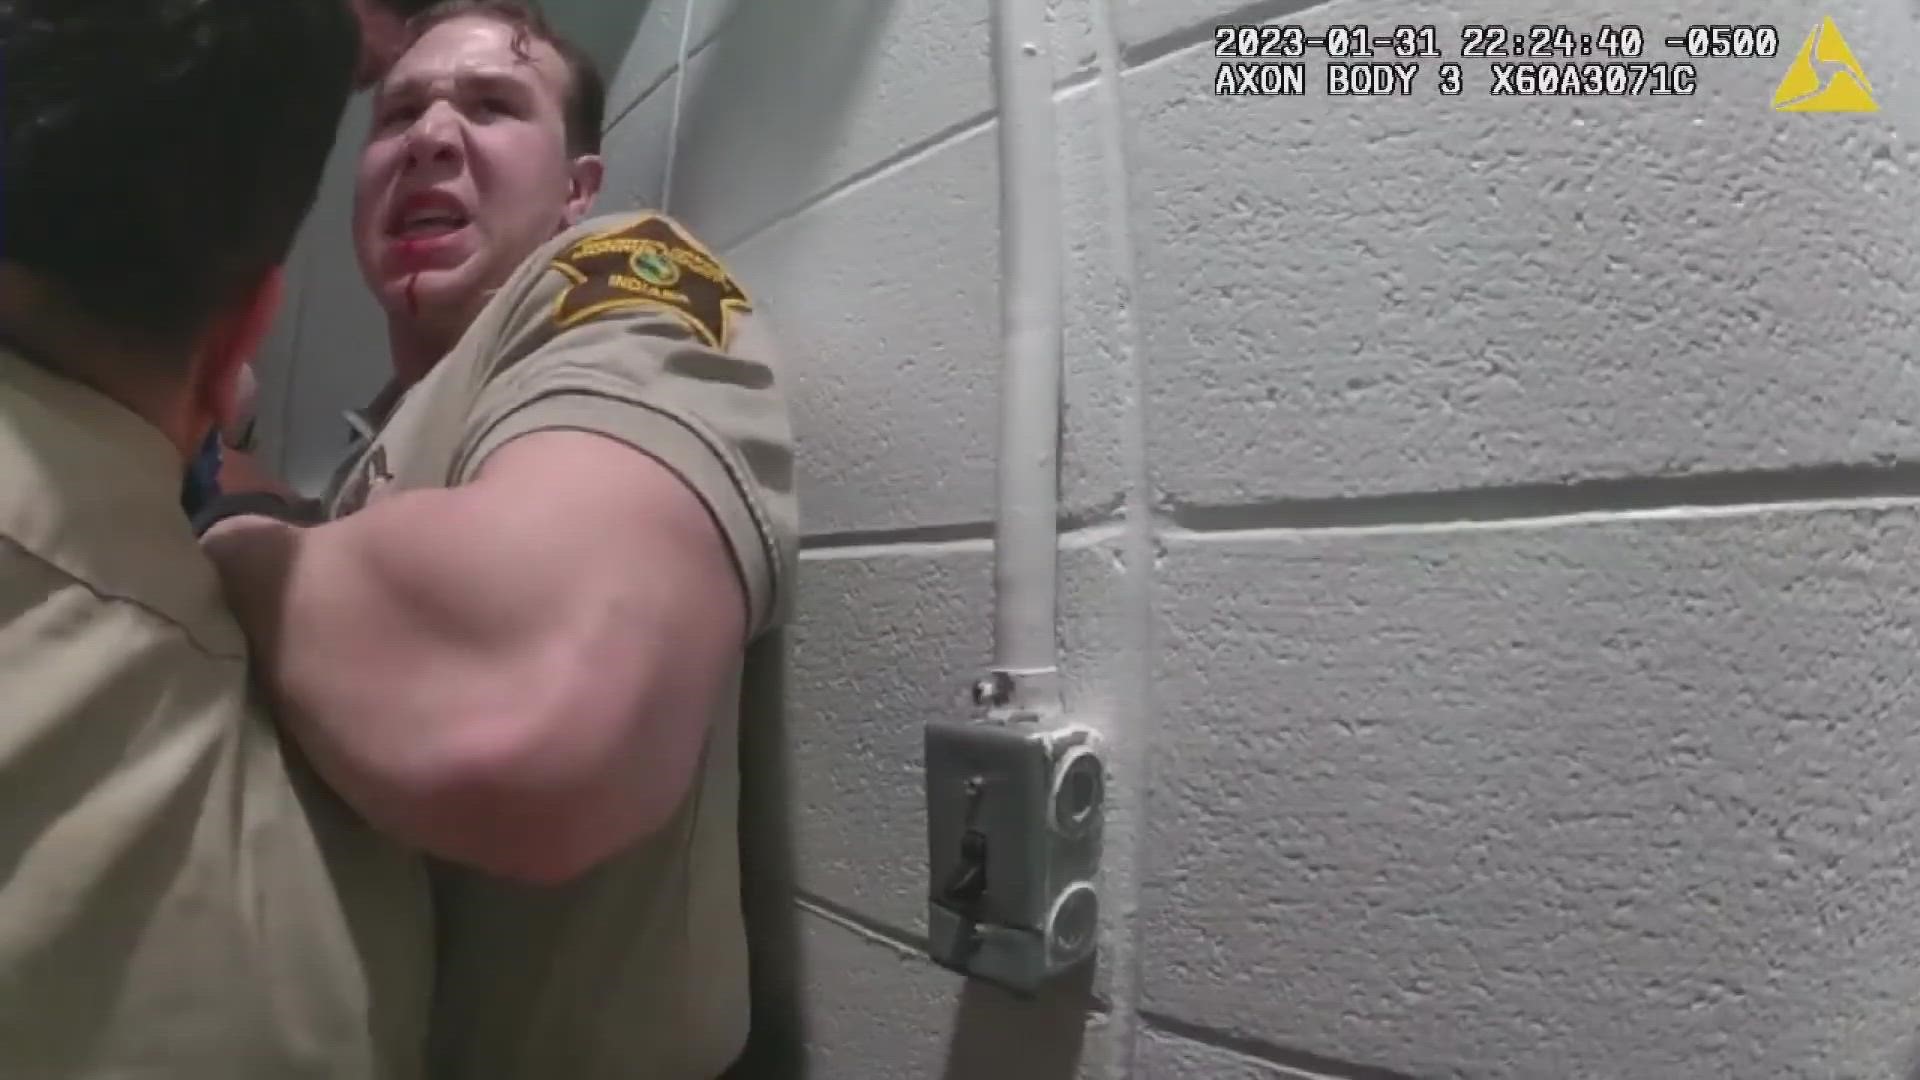 The video you're about to see is graphic. The Monroe County sheriff said one officer went 'too far' trying to subdue an inmate.